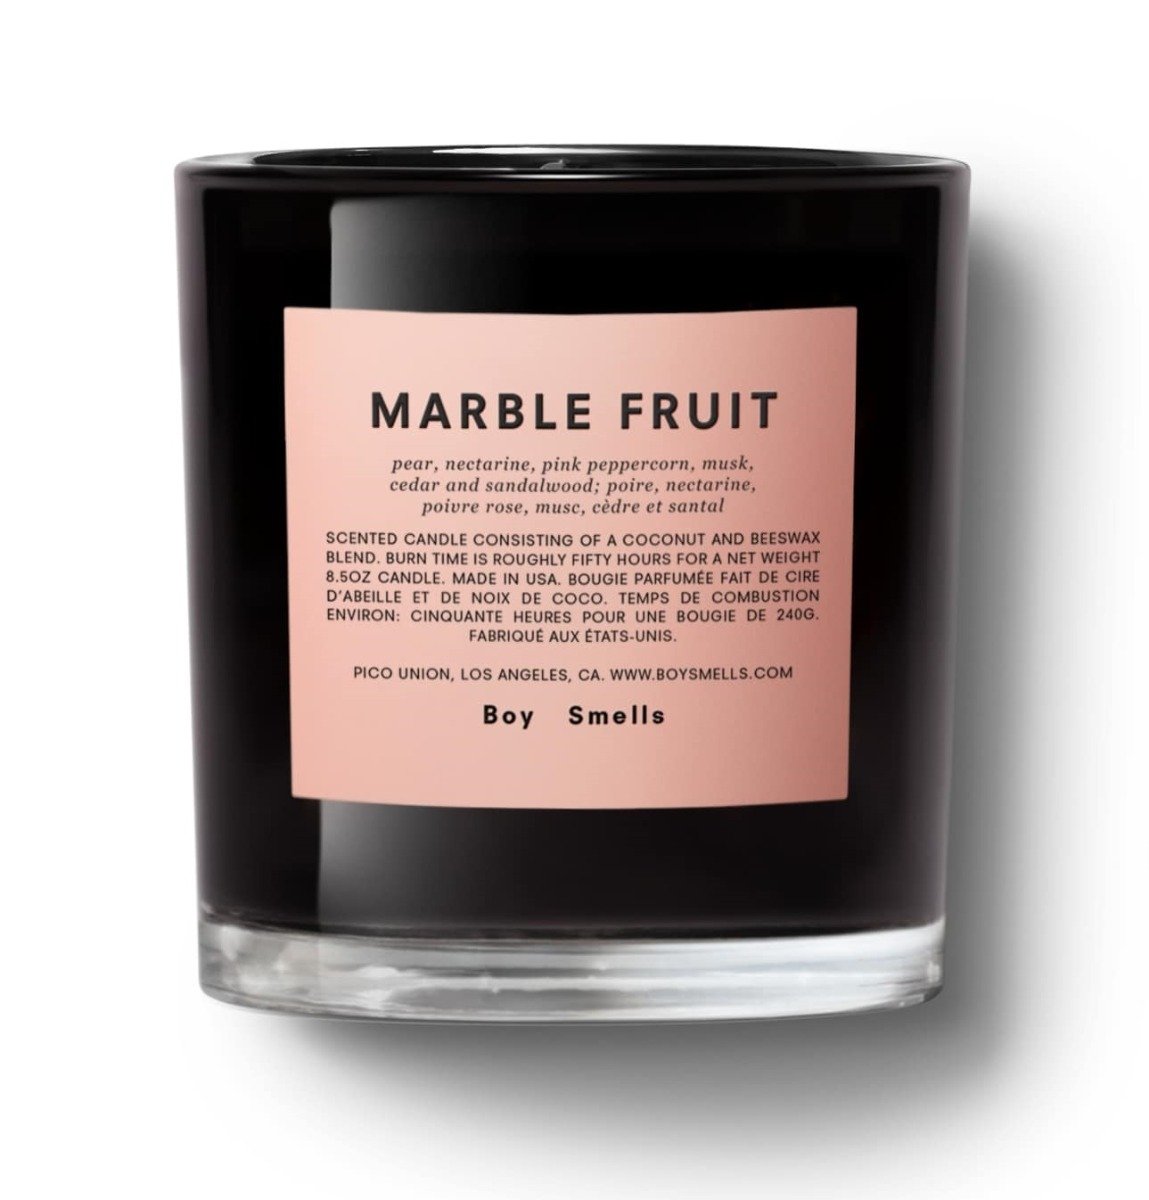 Marble Fruit Candle